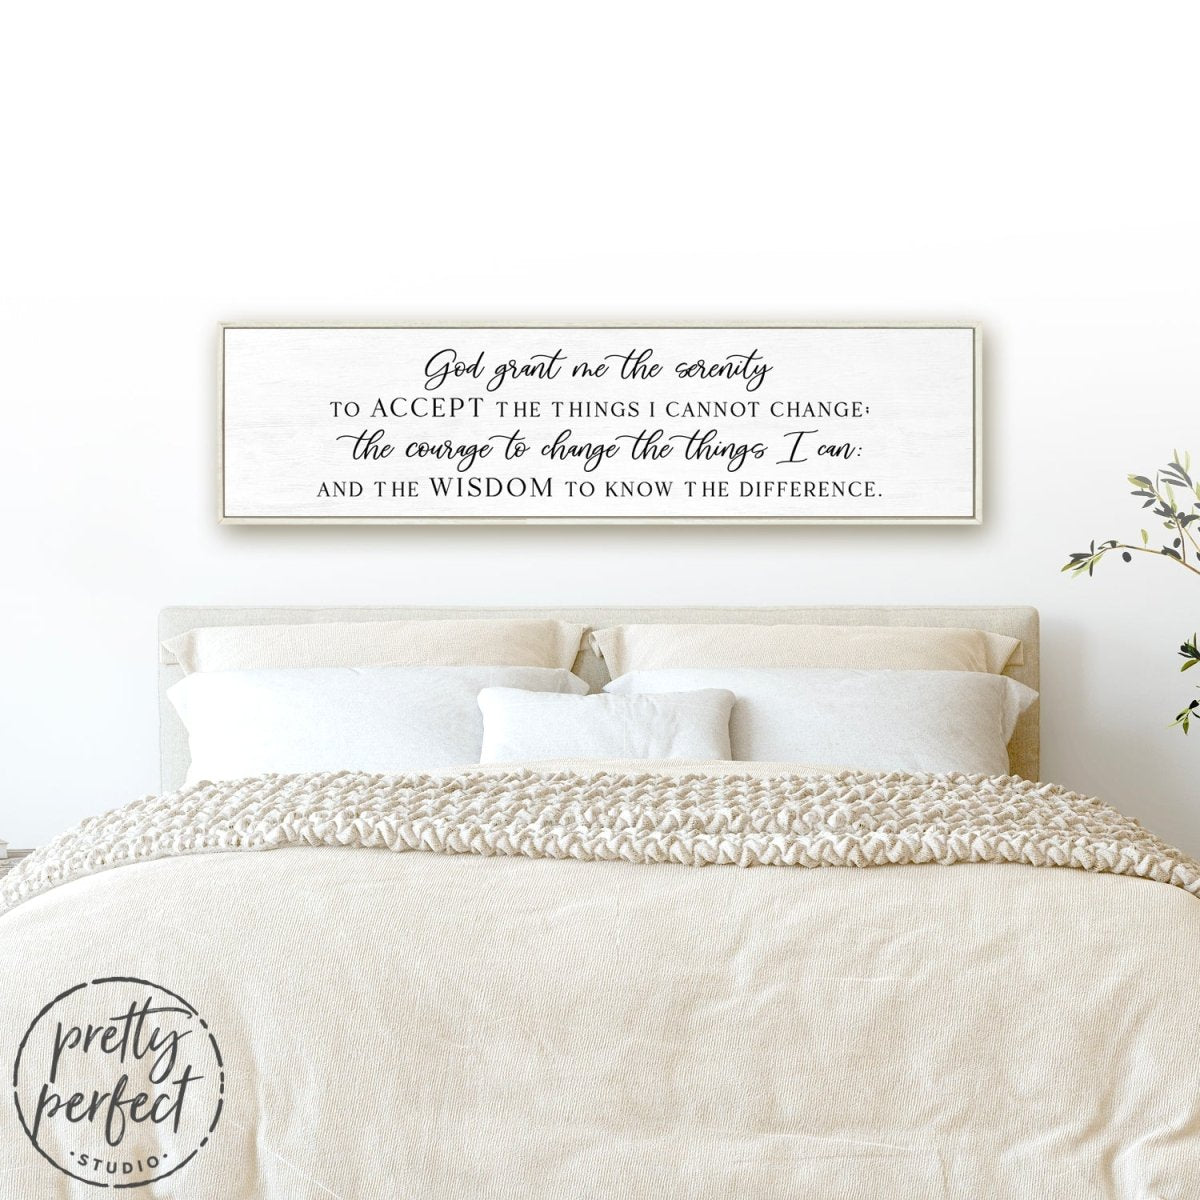 Serenity Prayer Sign Above Bed - Motivational Wall Art - Pretty Perfect Studio